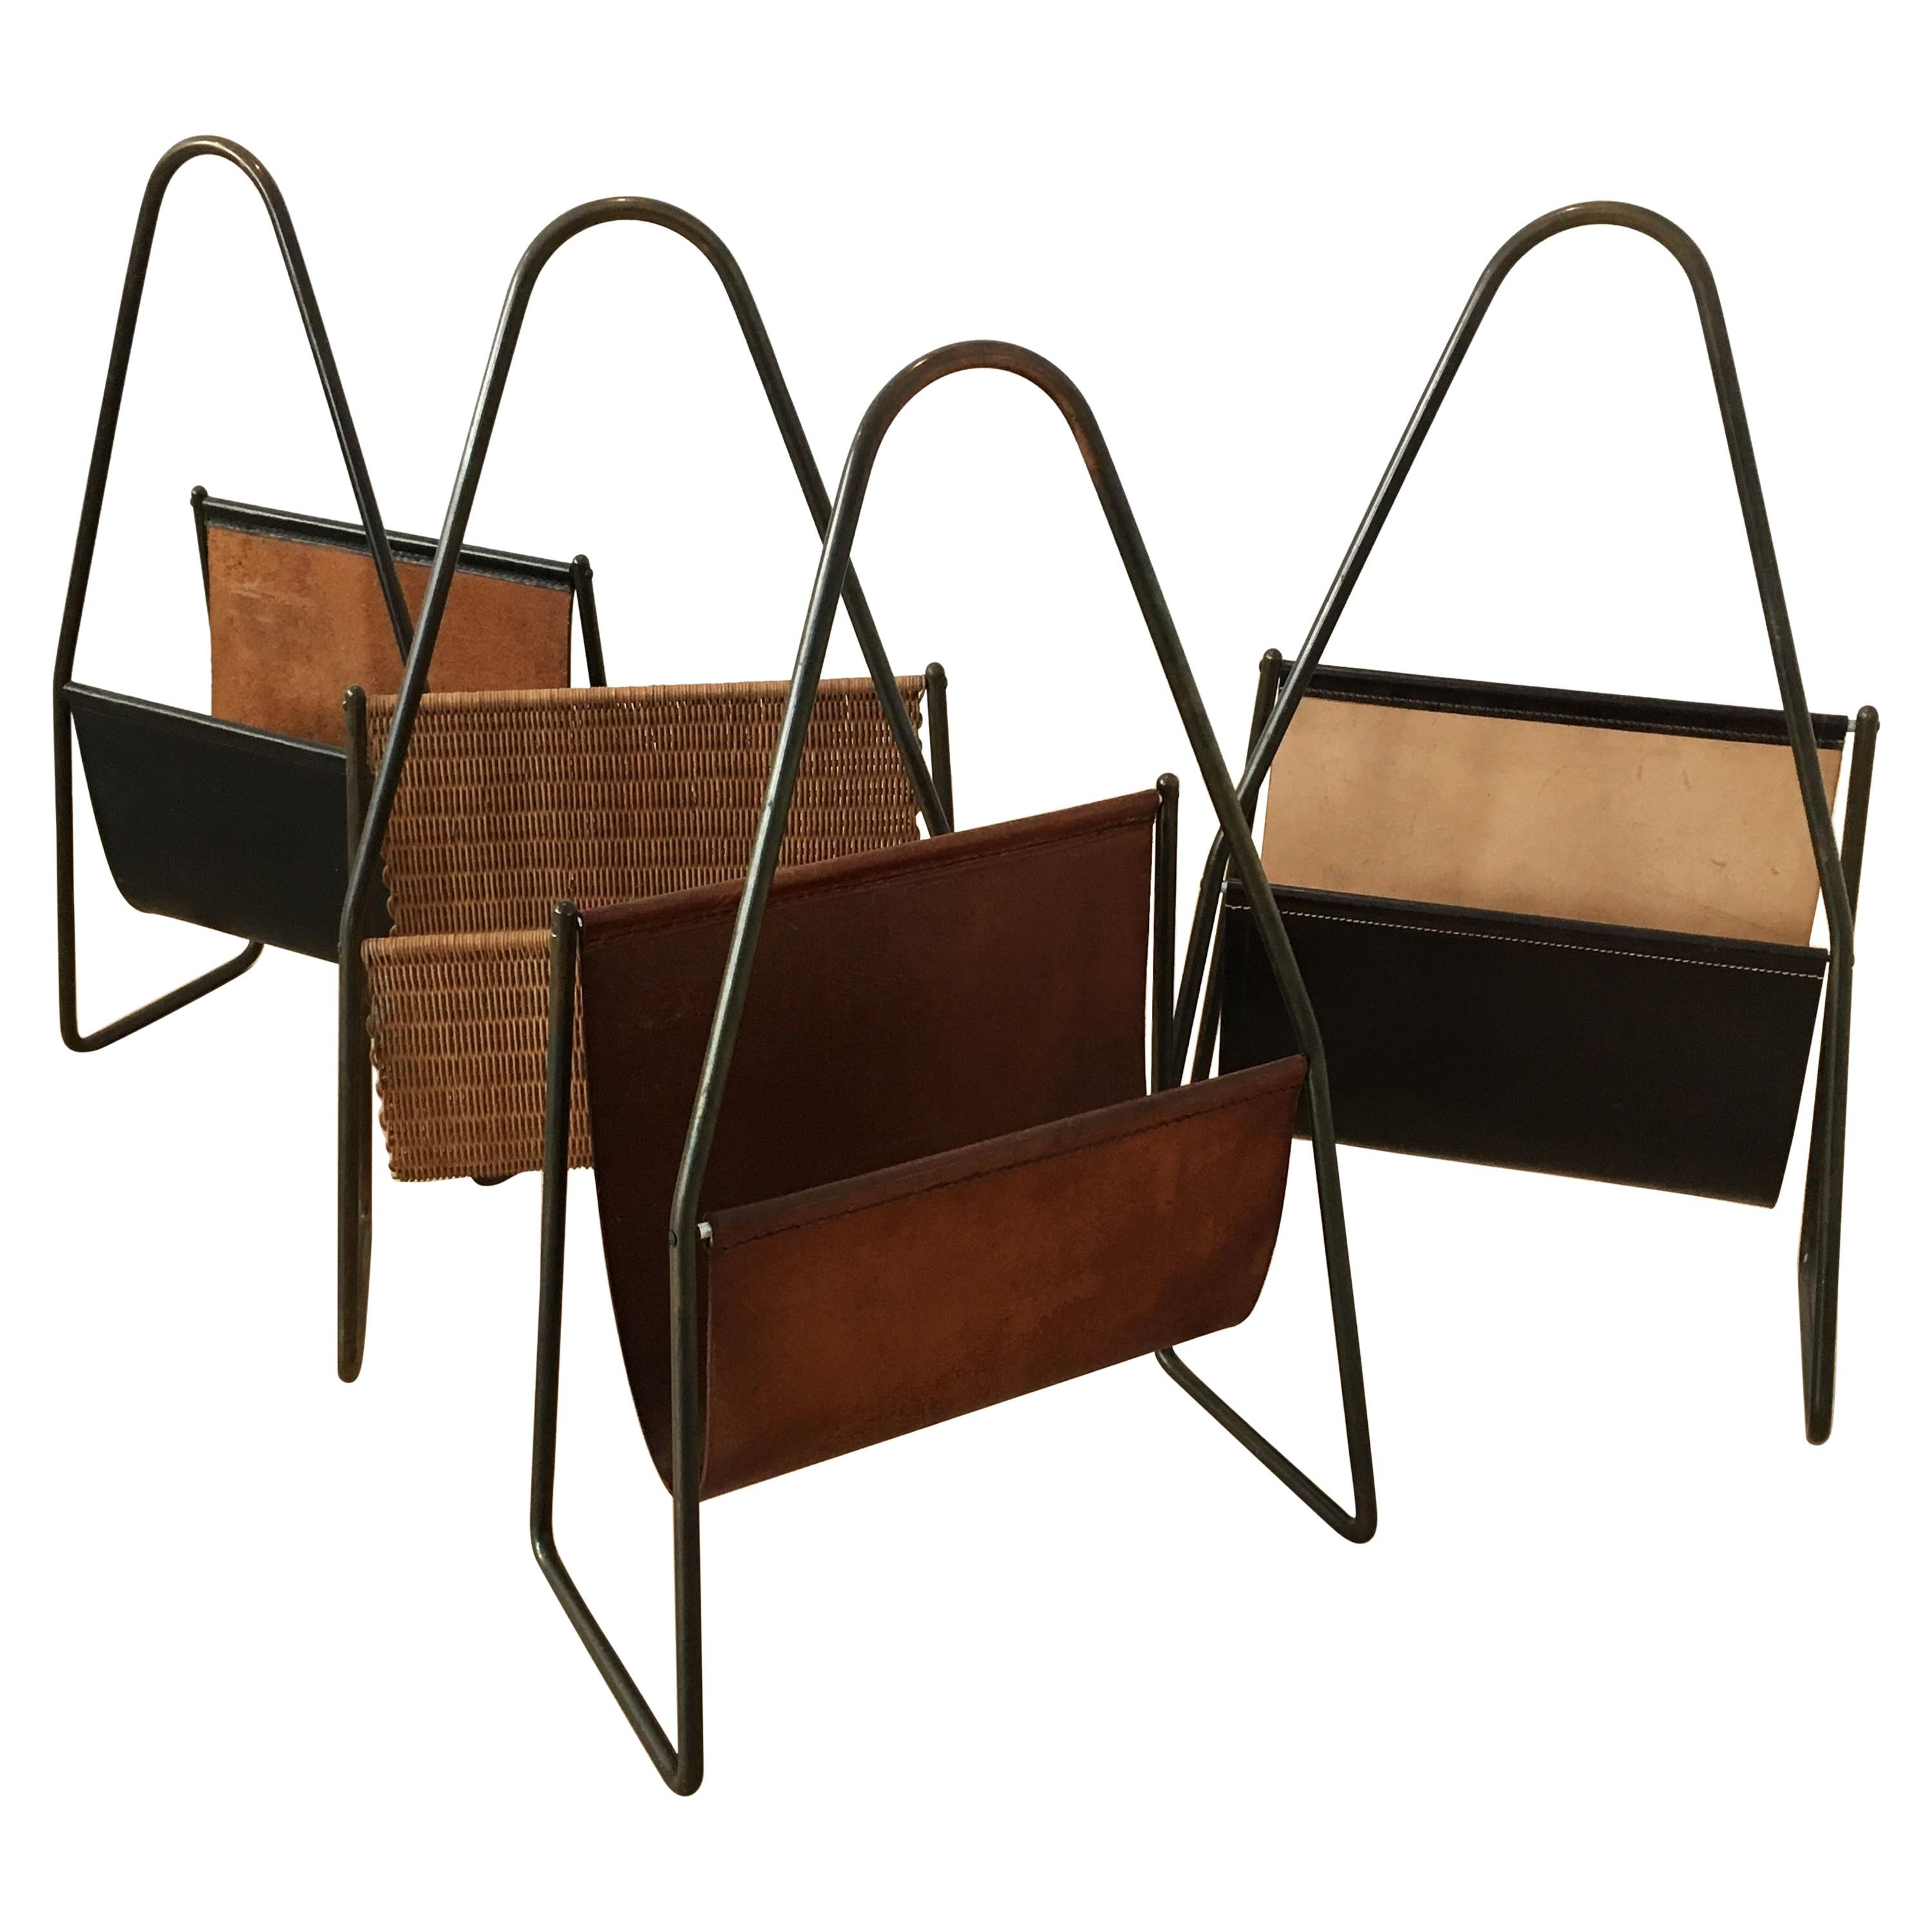 Carl Auböck Magazine Stand Collection, Group of Four, Austria, 1950s For Sale